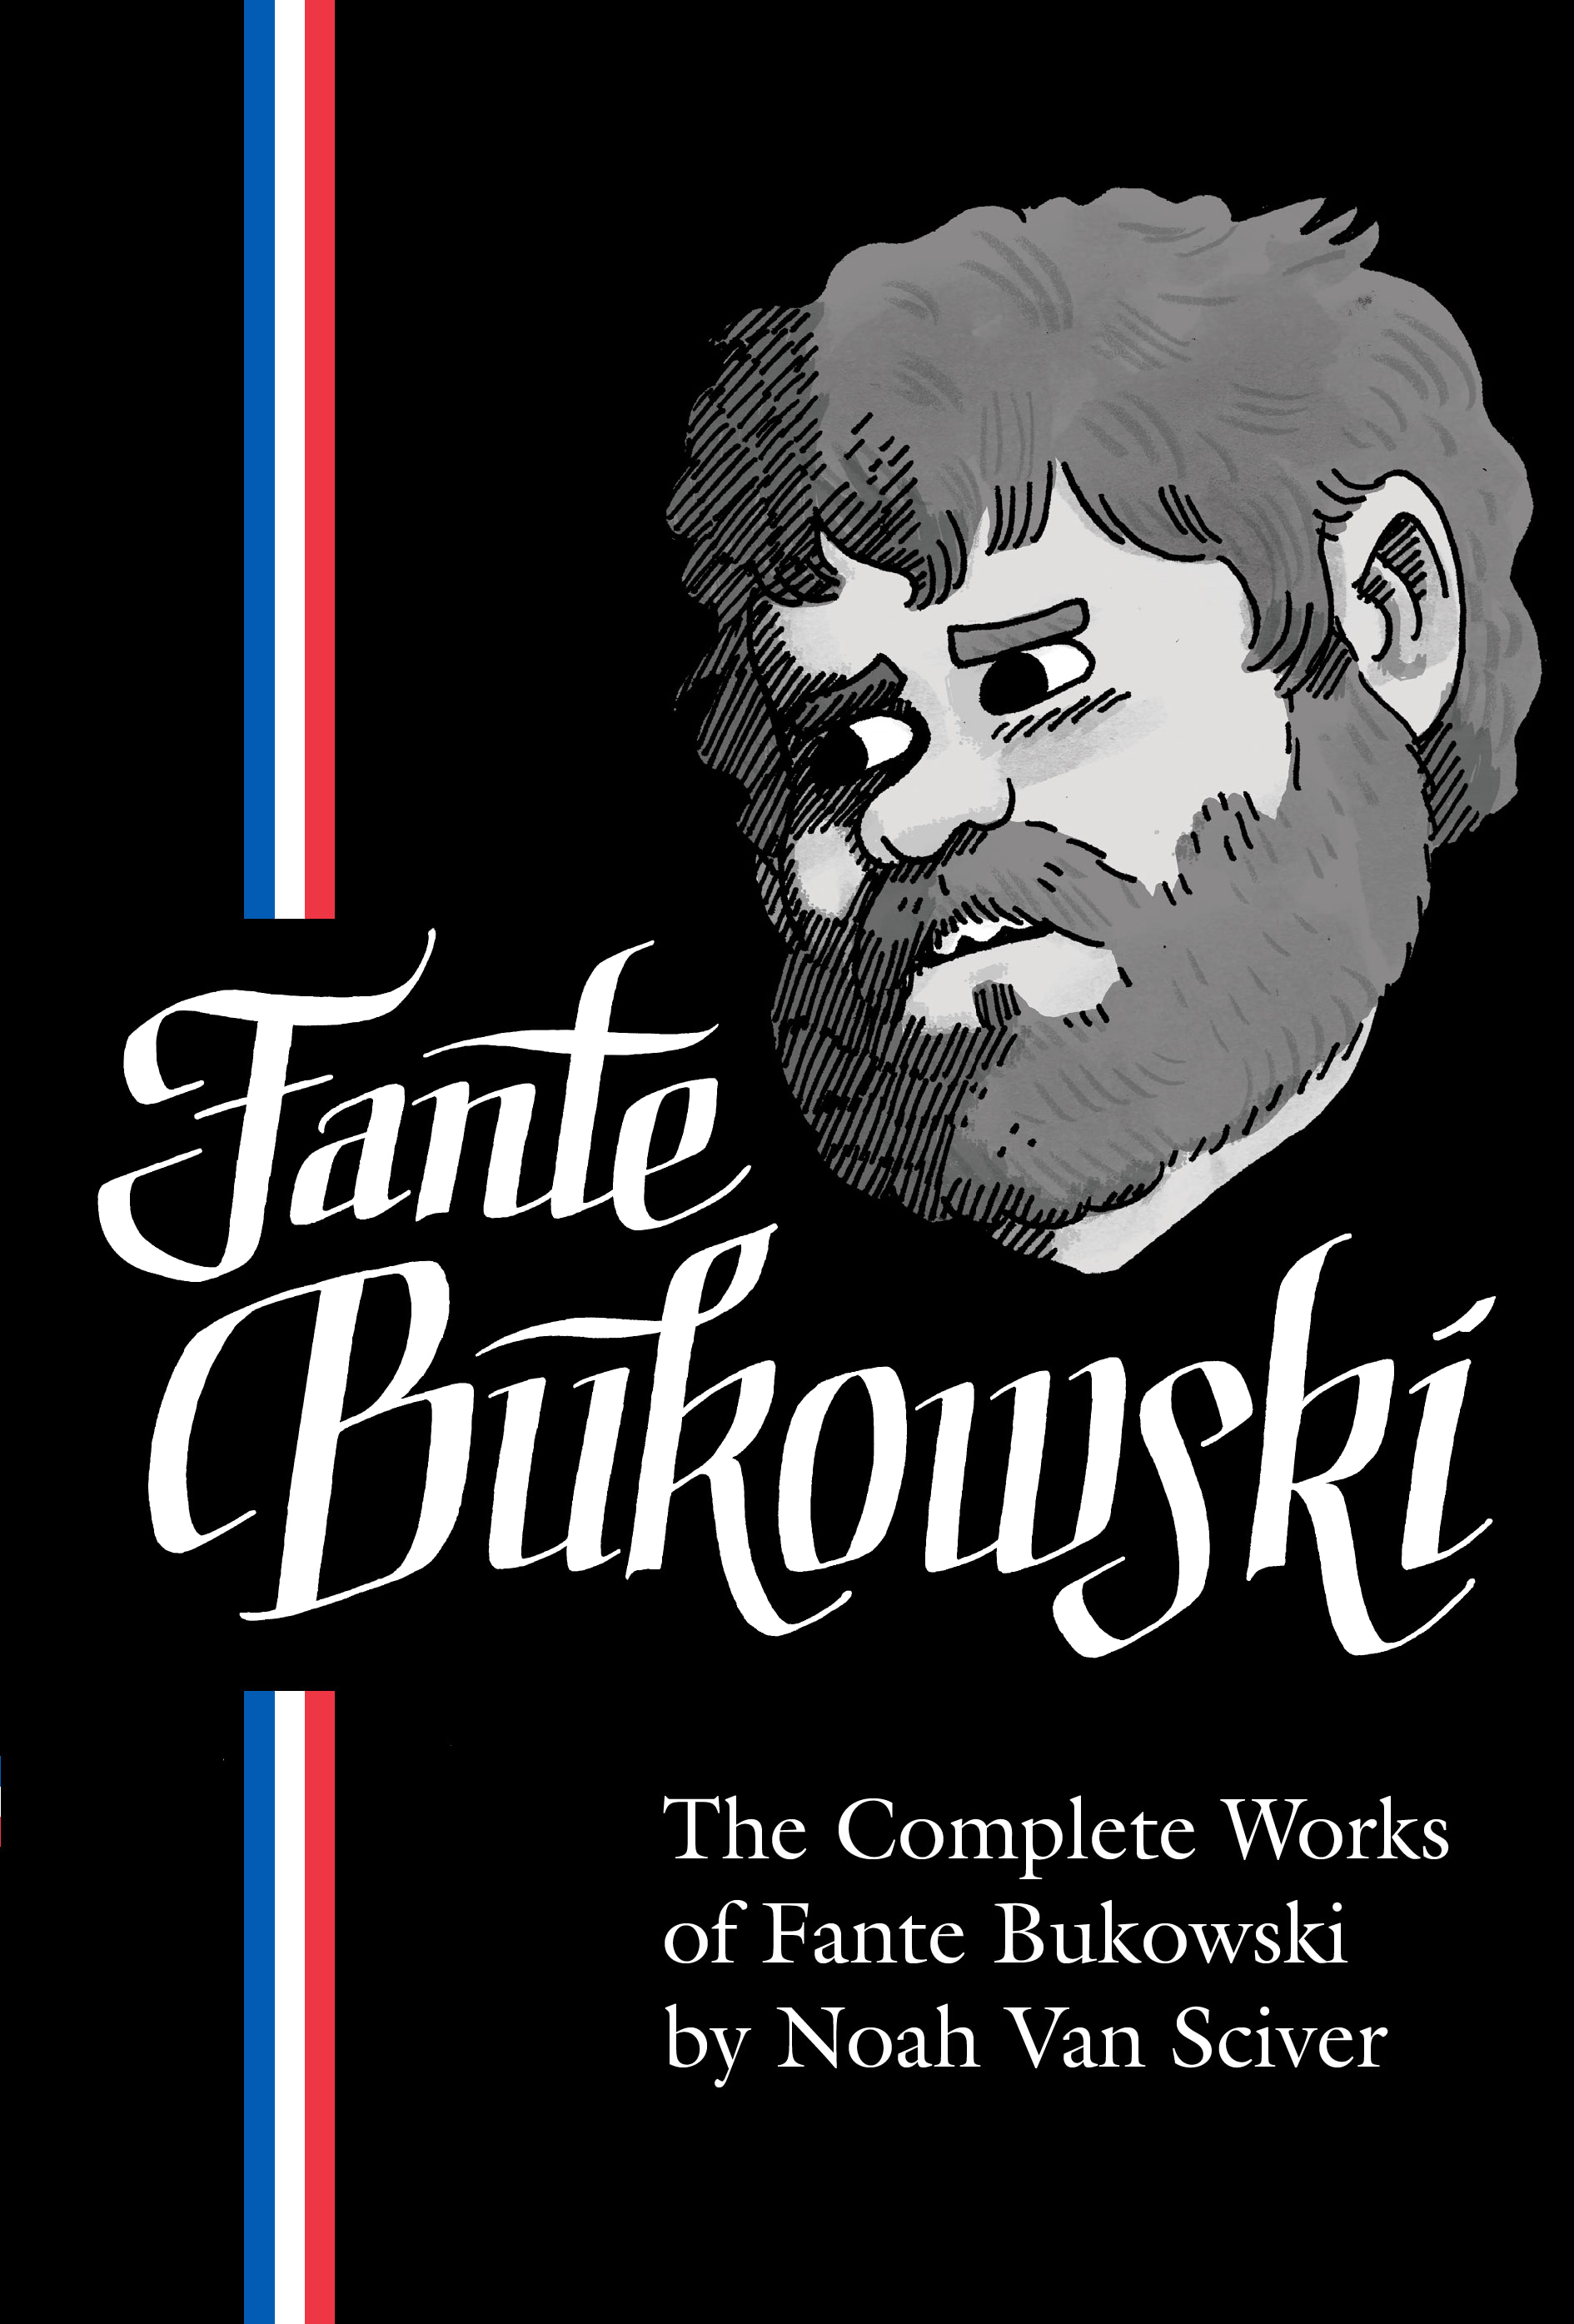 Read online The Complete Works of Fante Bukowski comic -  Issue # TPB (Part 1) - 1